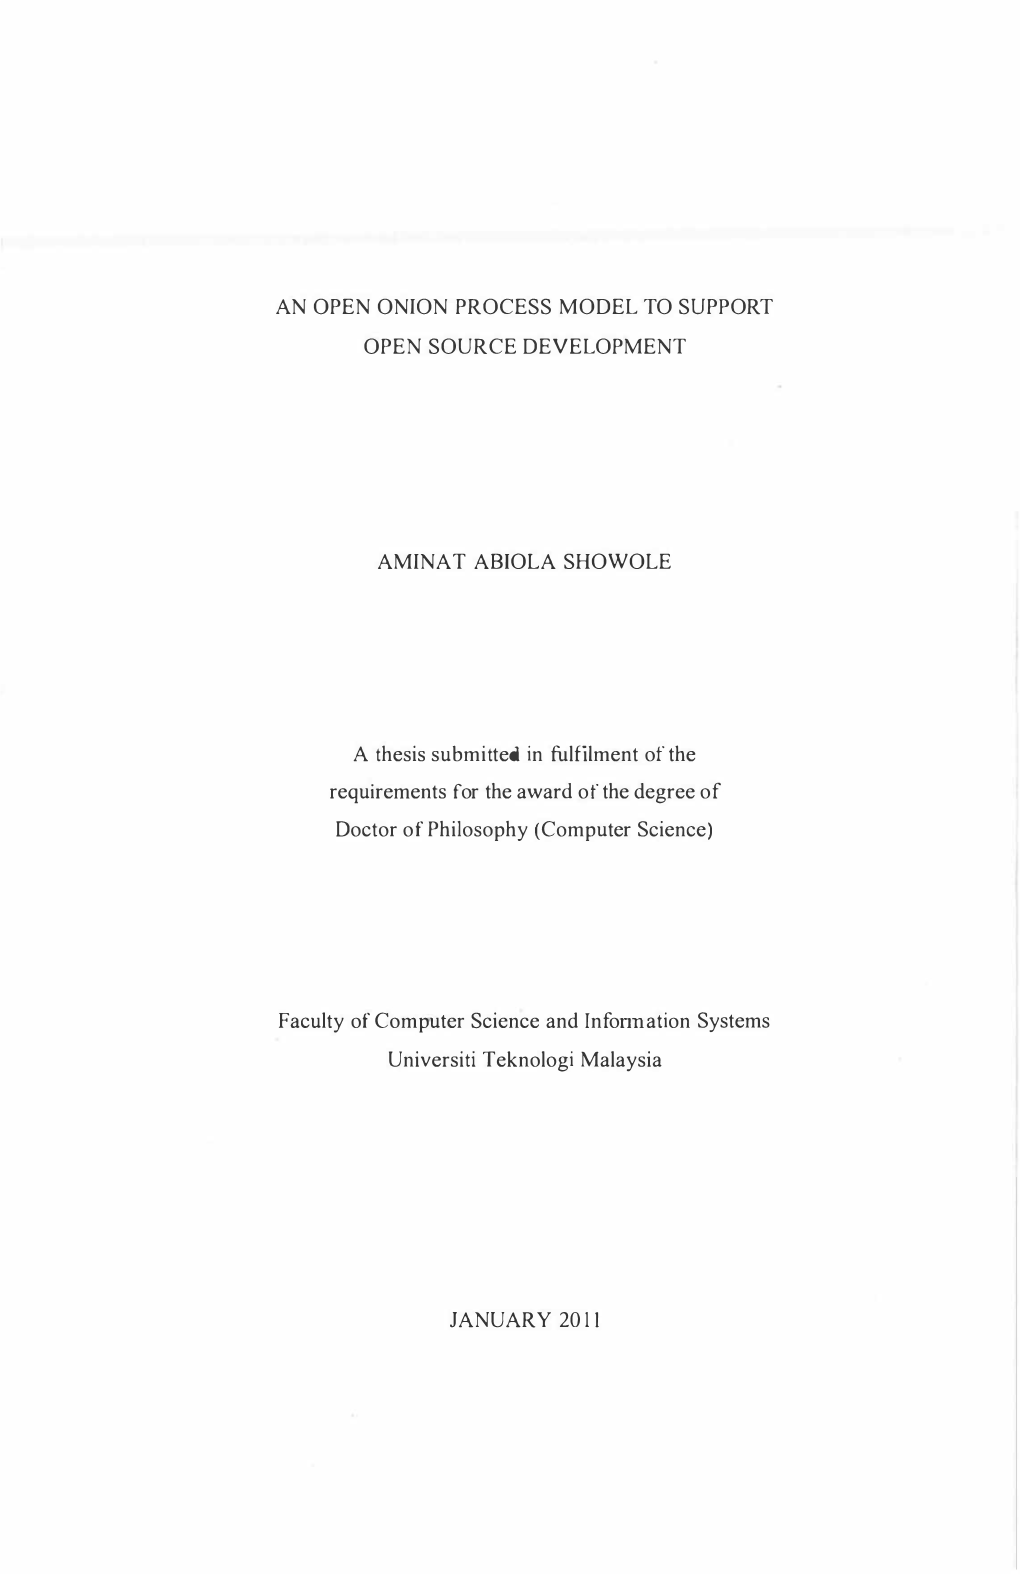 AN OPEN ONION PROCESS MODEL to SUPPORT OPEN SOURCE DEVELOPMENT AMINAT ABIOLA SHOWOLE a Thesis Submitted in Fulfilment of The